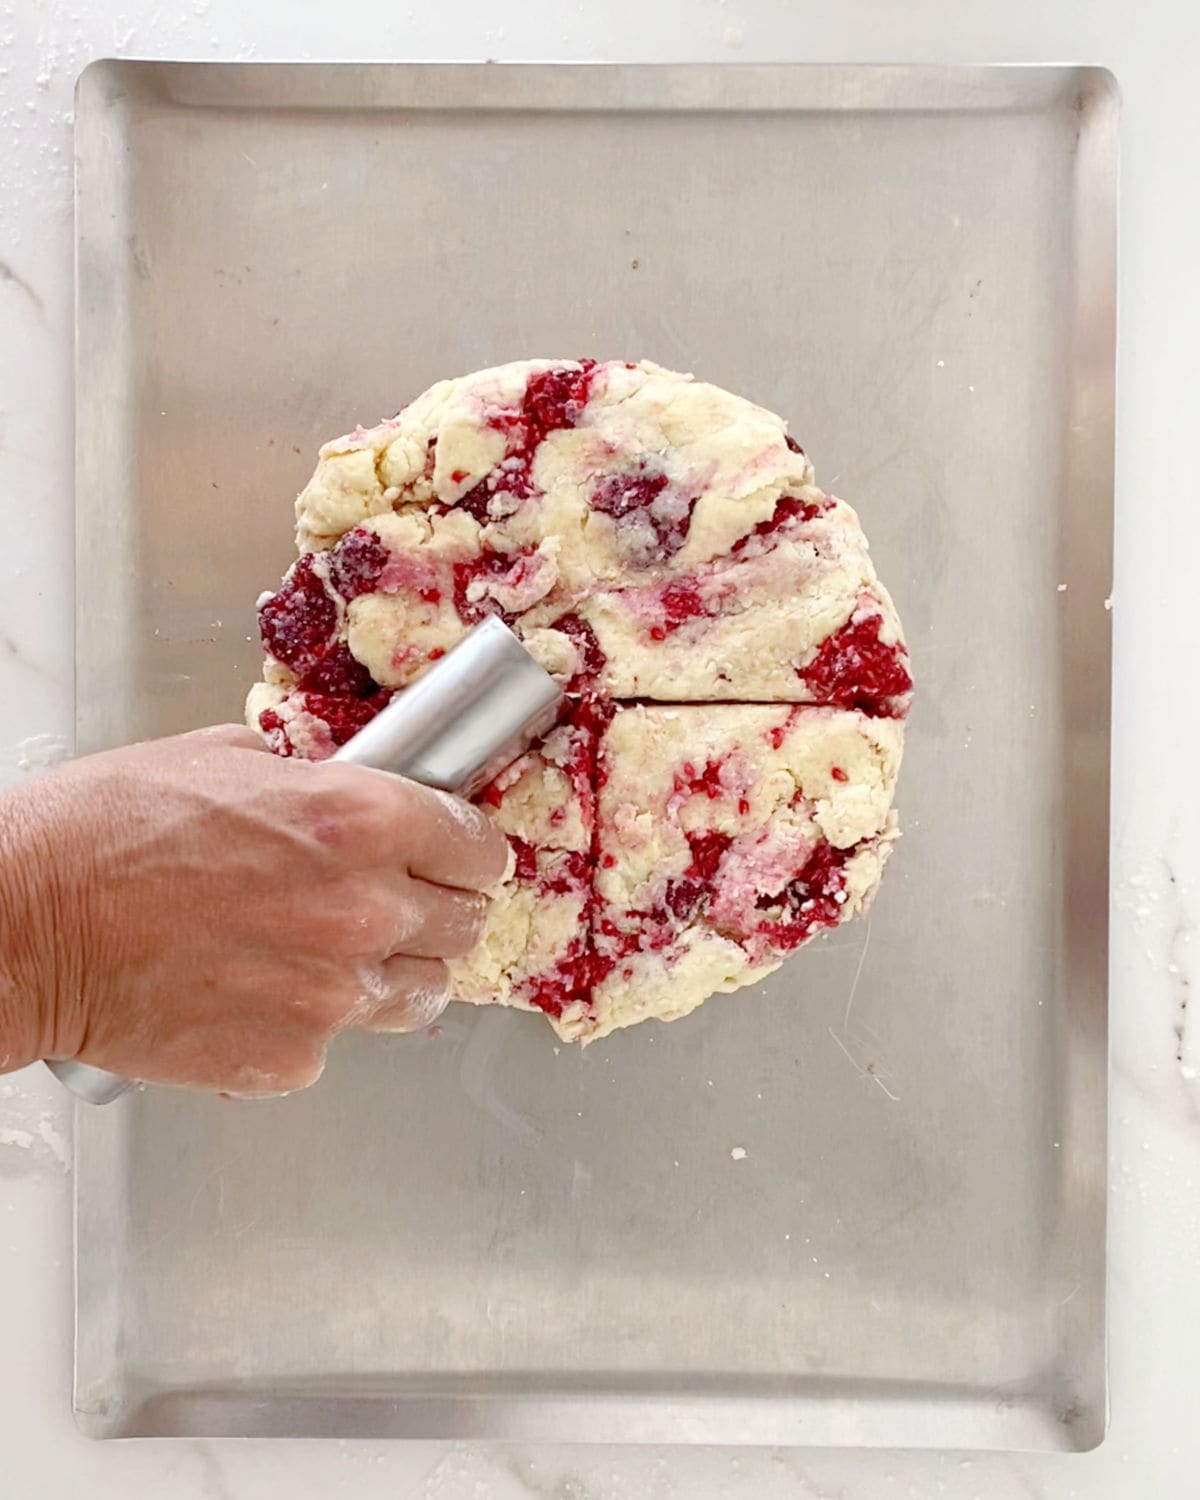 Cutting triangles of raspberry scones with a dough scraper on a metal baking sheet.